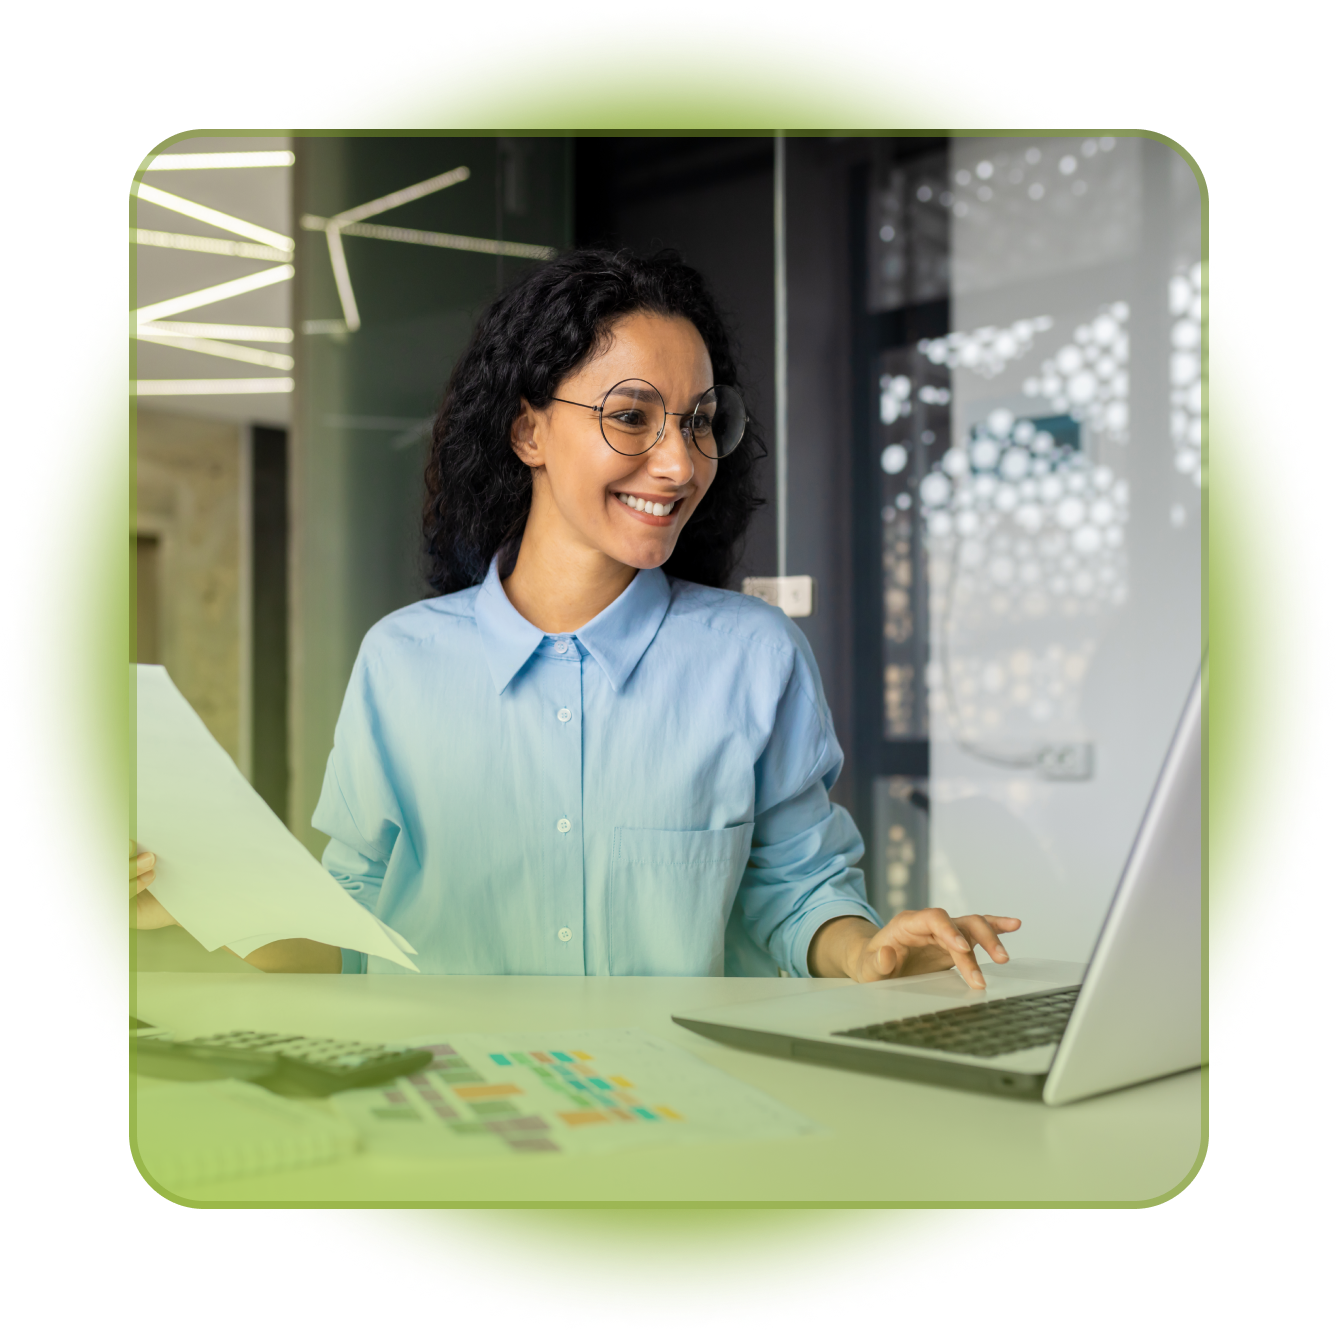 Woman smiling on computer organizing files